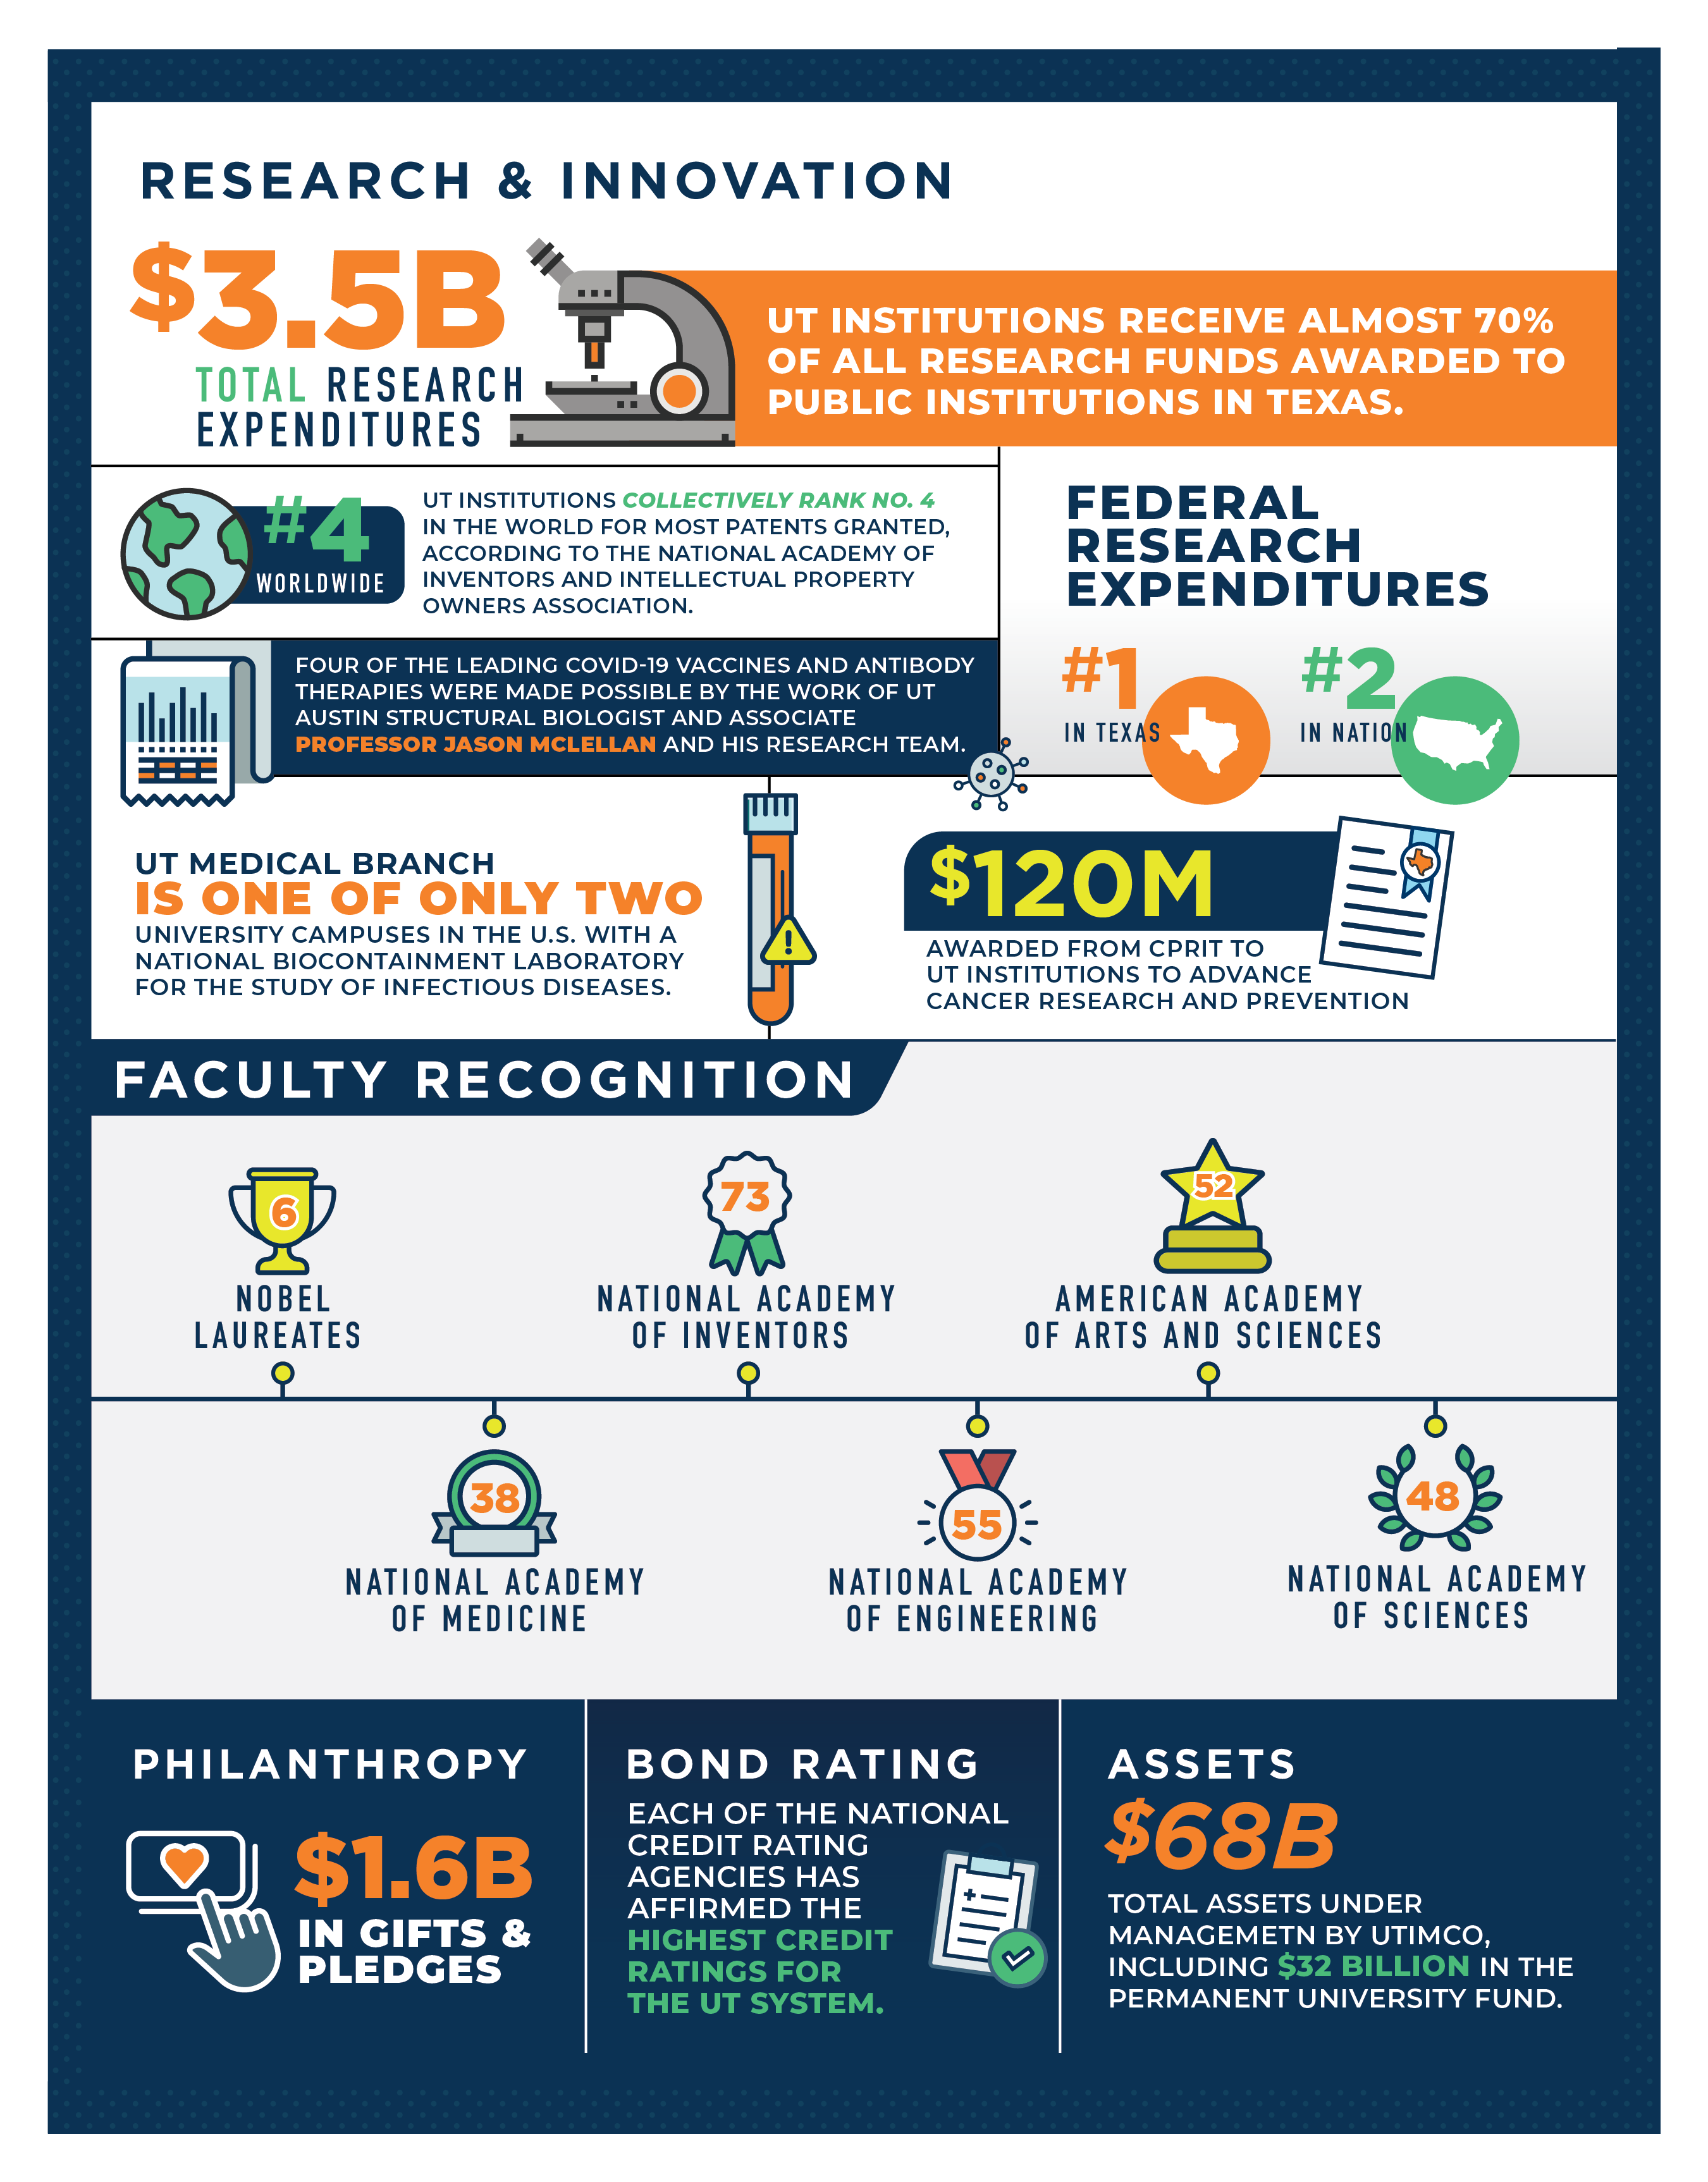 Text on the infographic- Content: $3.5 billion in total research expenditures. UT institutions receive almost 70% of all research funds awarded to public institutions in Texas. UT institutions collective rank 4th in the world for most patents granted. UT System is number 1 in Texas and number 2 in the nation for Federal Research Expenditures. There is $1.6 billion in gifts and pledges. Each of the national credit rating agencies has affirmed the highest credit rating for the UT System. There are a $68 billi